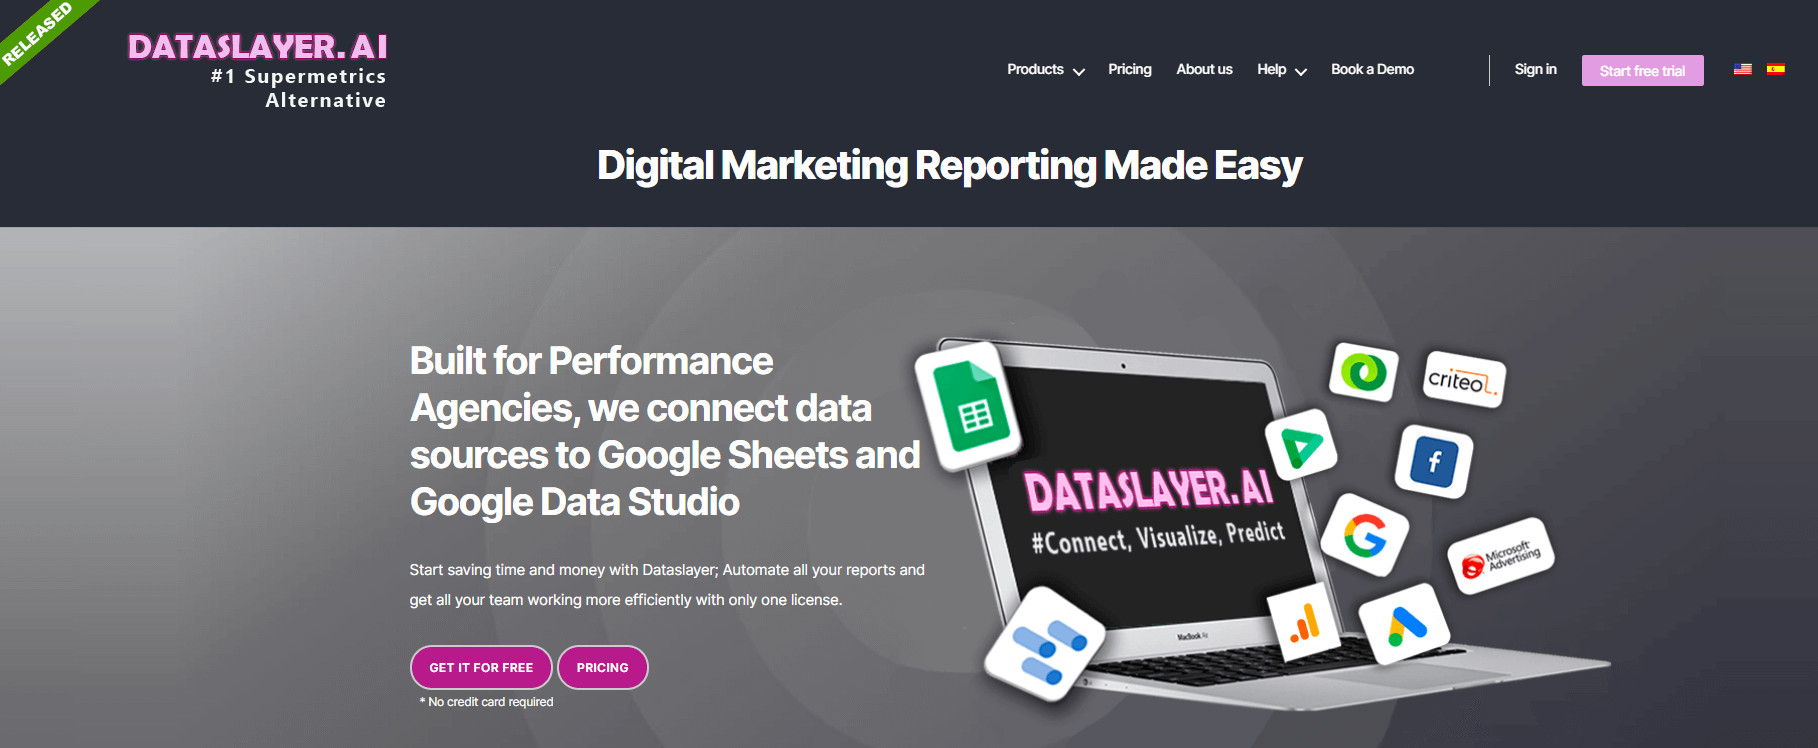 Dataslayer.ai reporting automation software